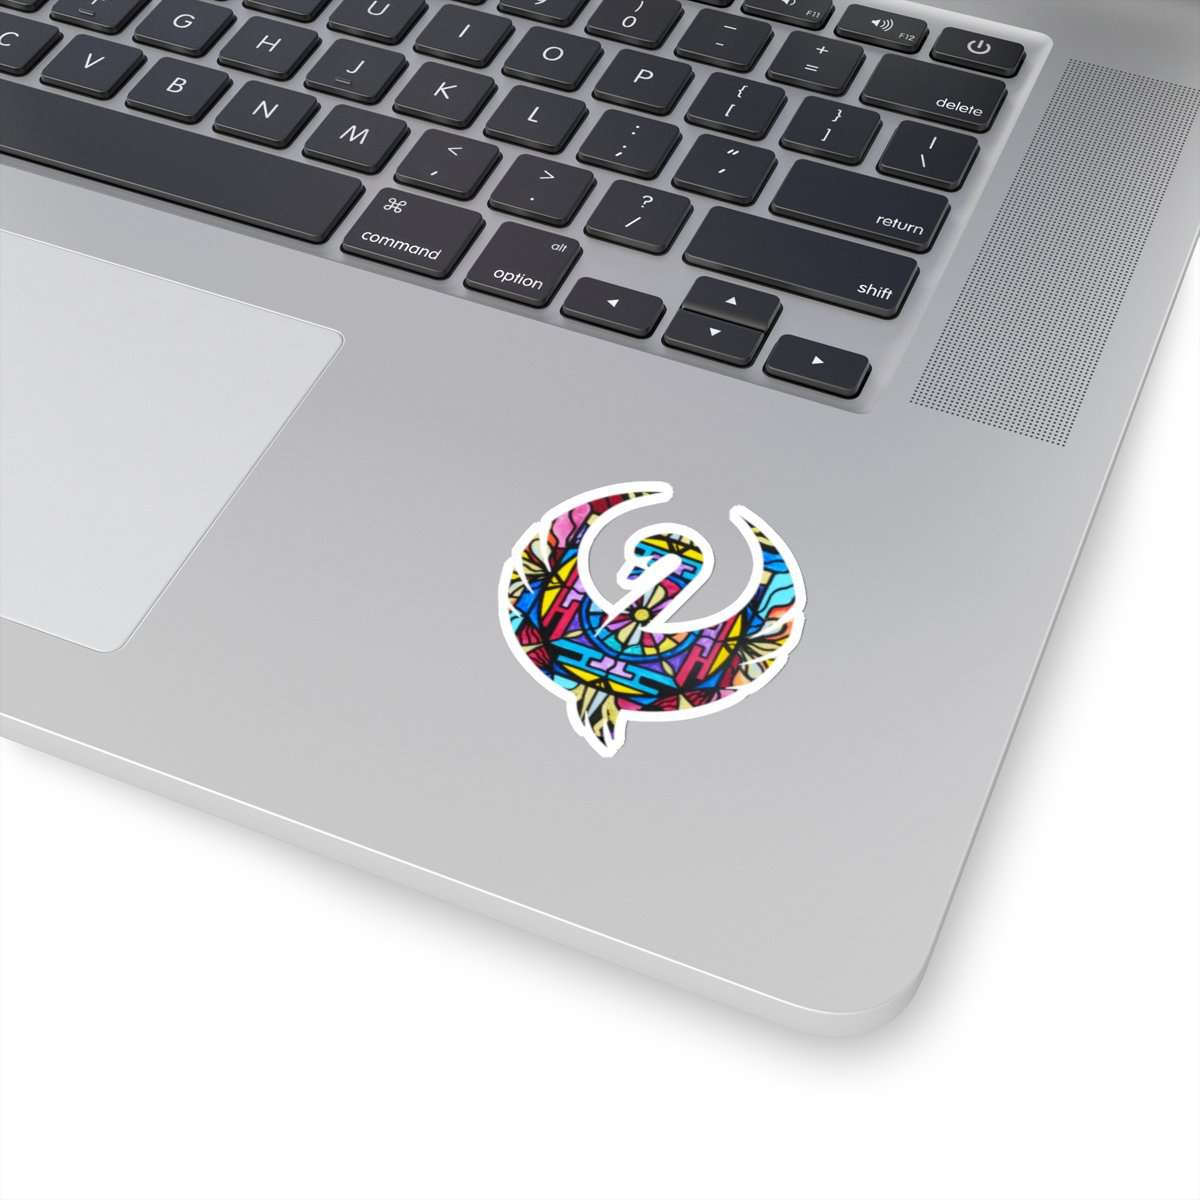 sell-and-buy-opulence-swan-stickers-online-sale_3.jpg